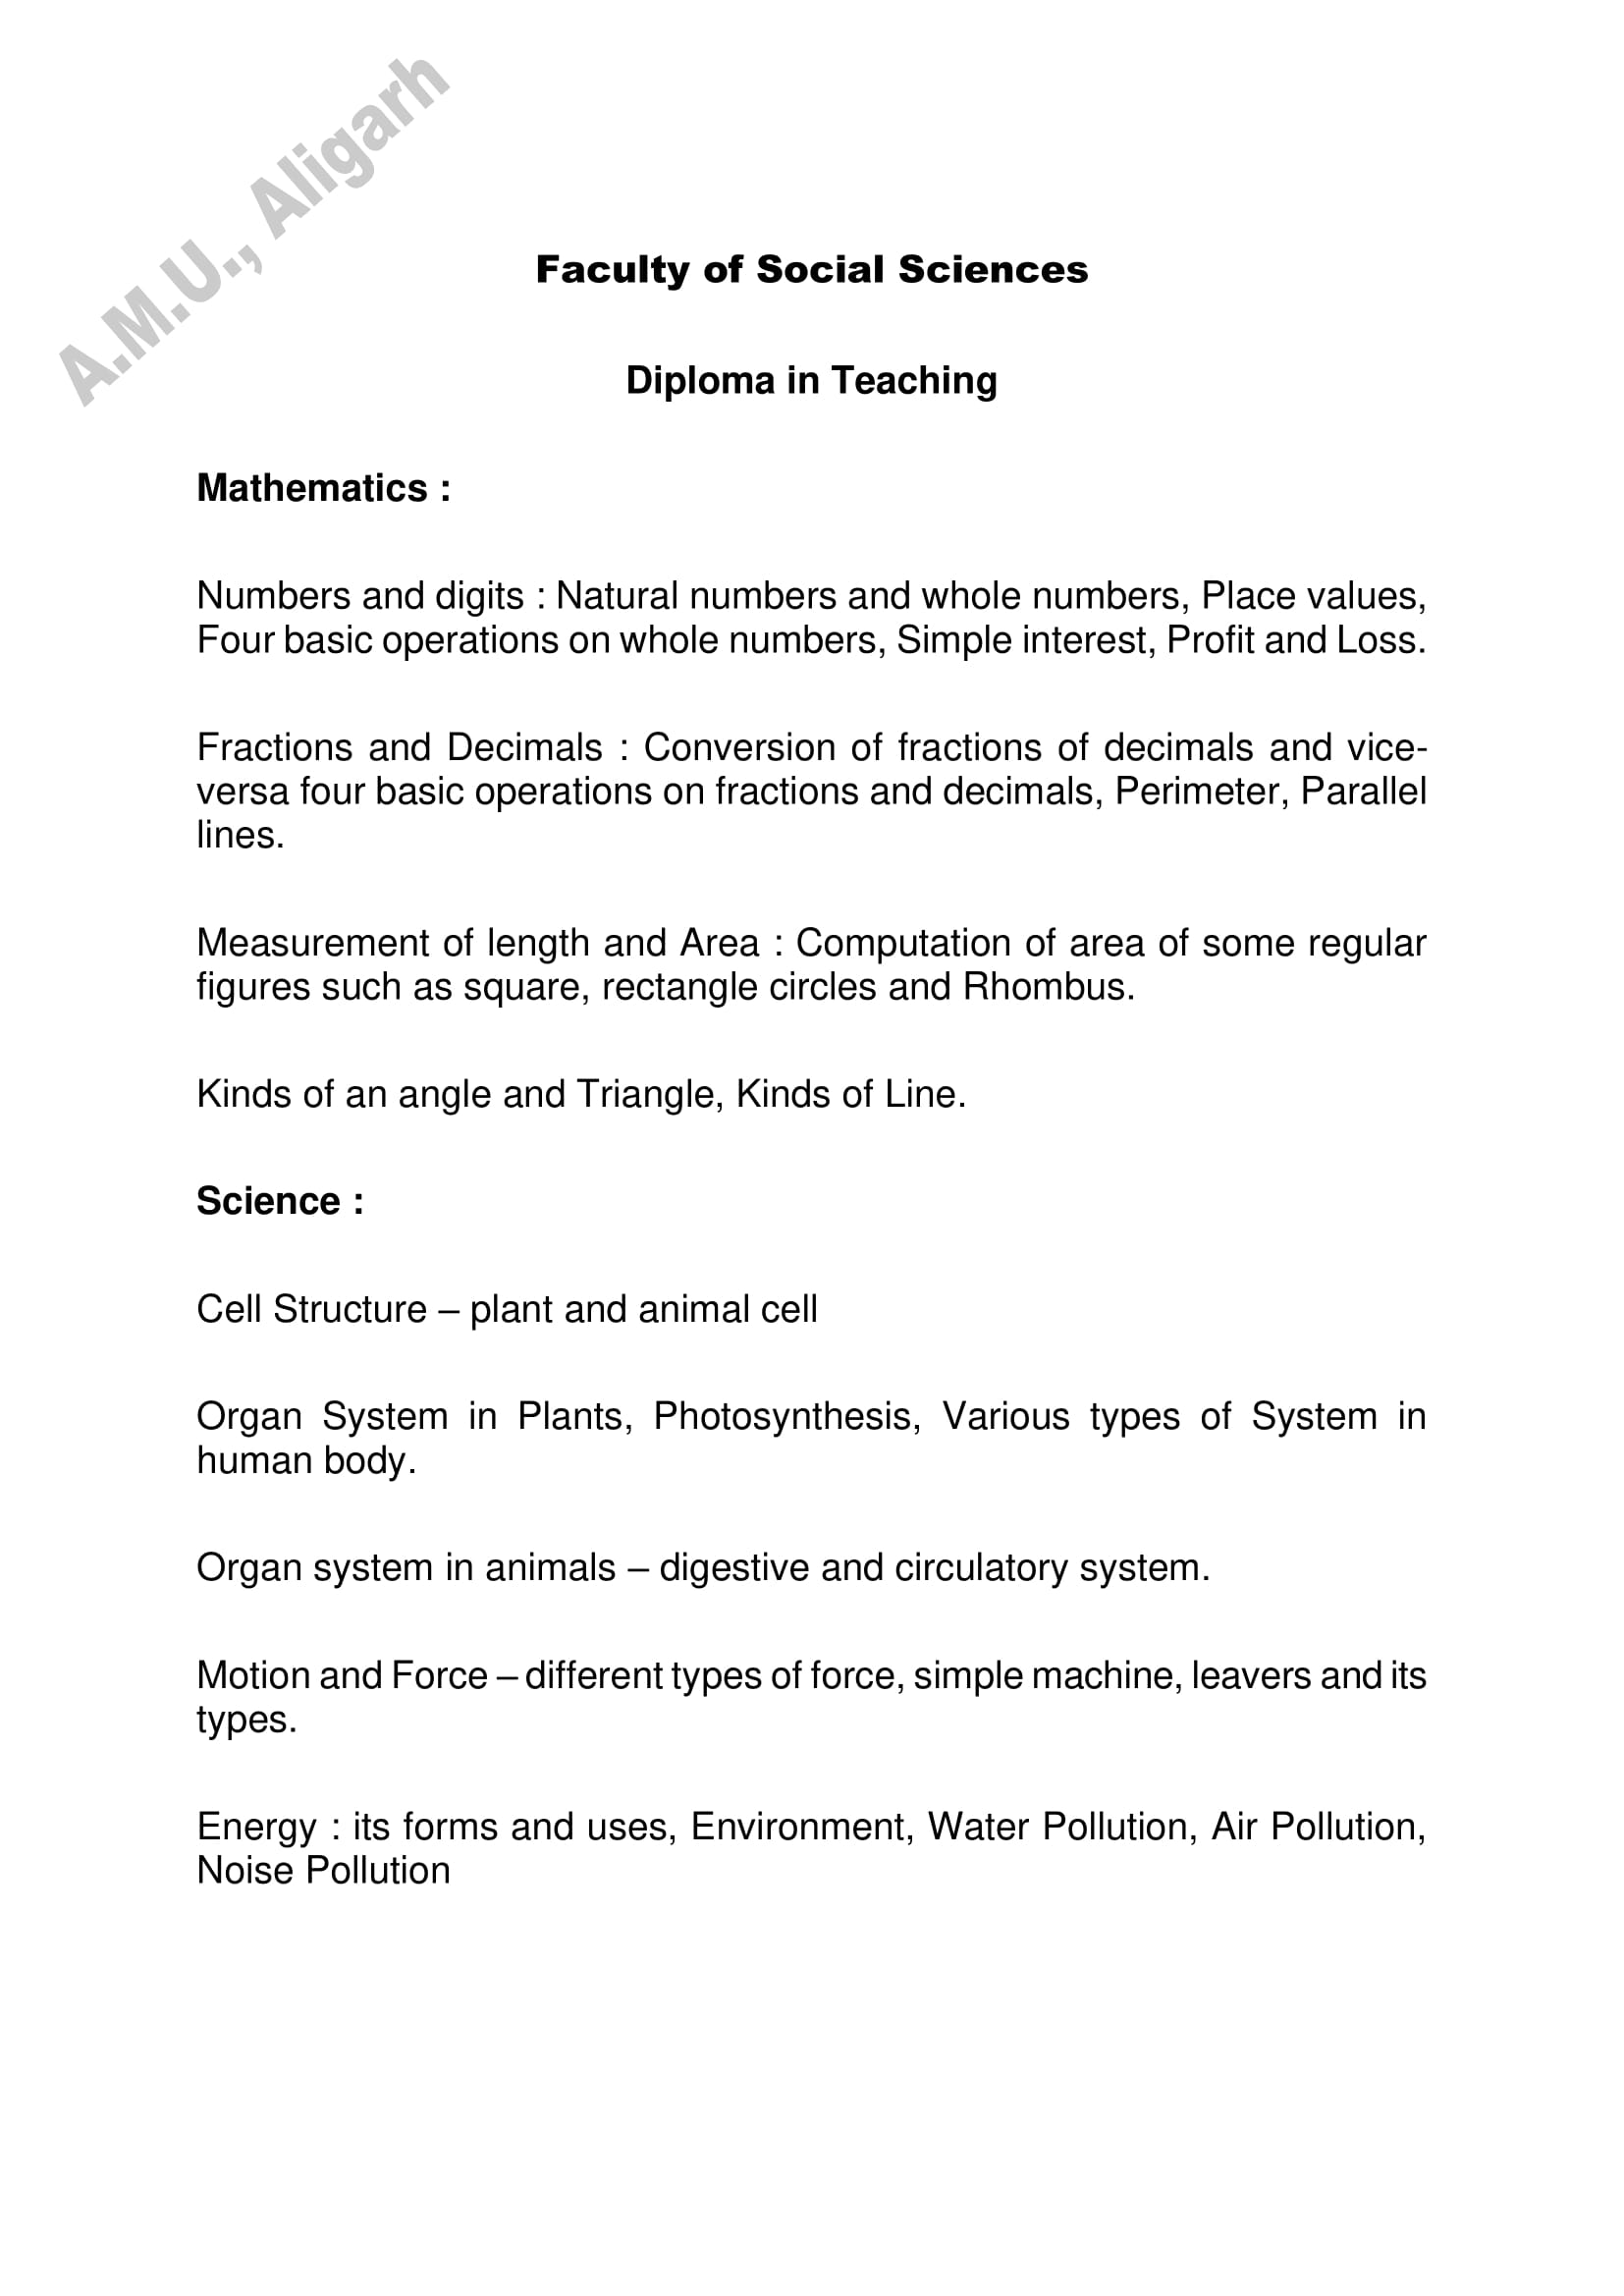 AMU Entrance Exam Syllabus for Diploma in Teaching - Page 1